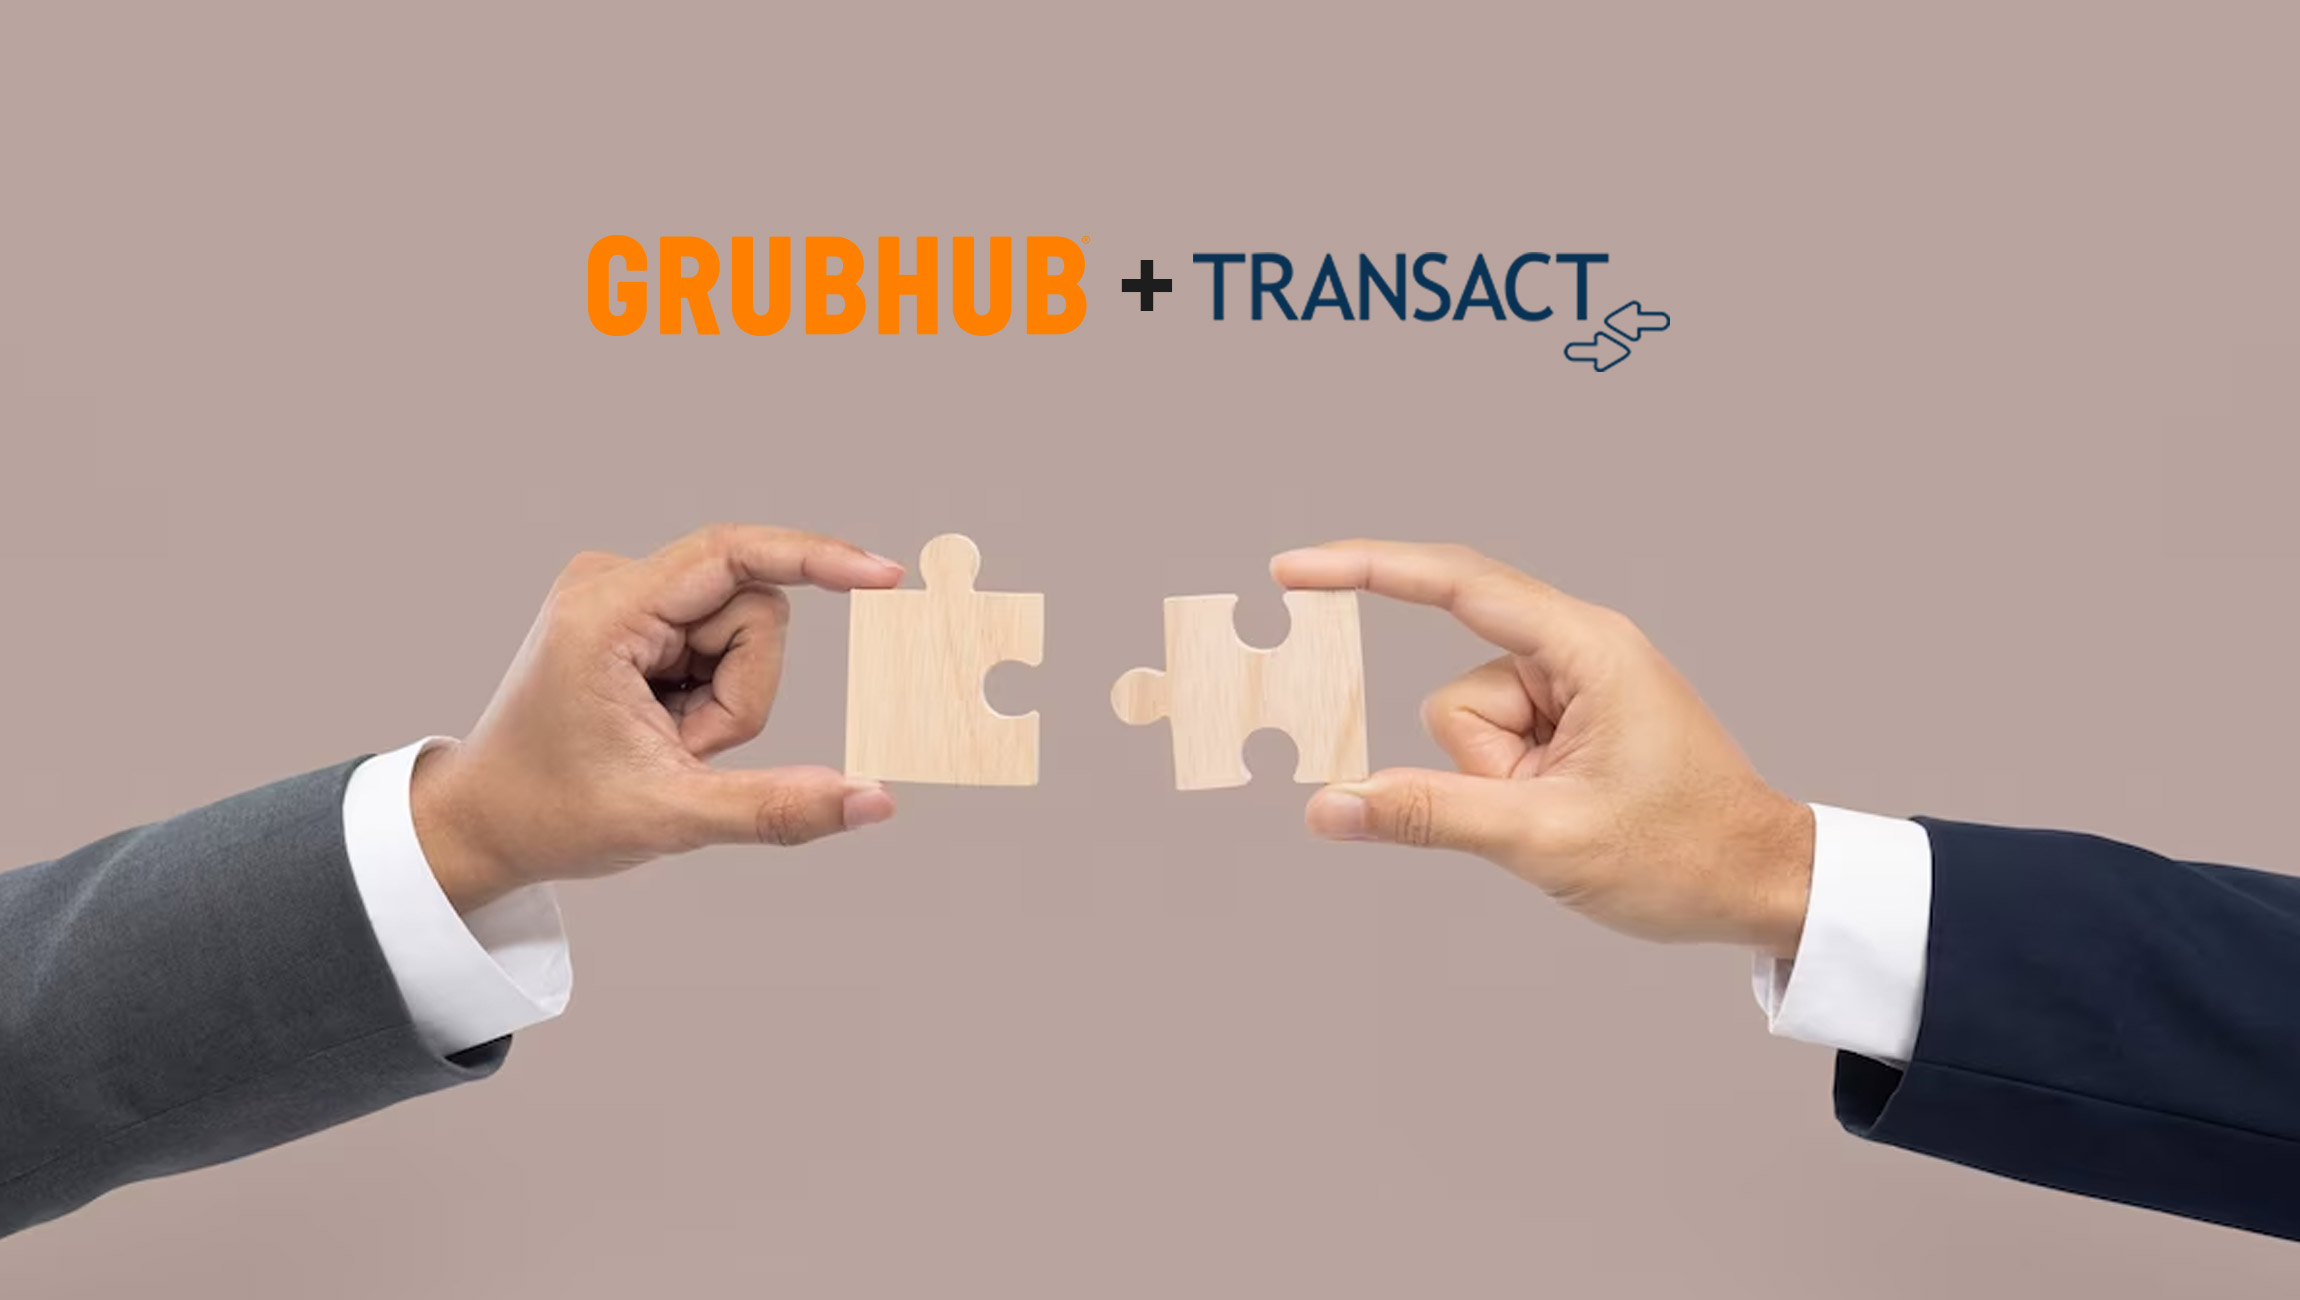 Grubhub and Transact Campus Expand Partnership with First-of-Its-Kind Integrated Mobile Ordering Solution